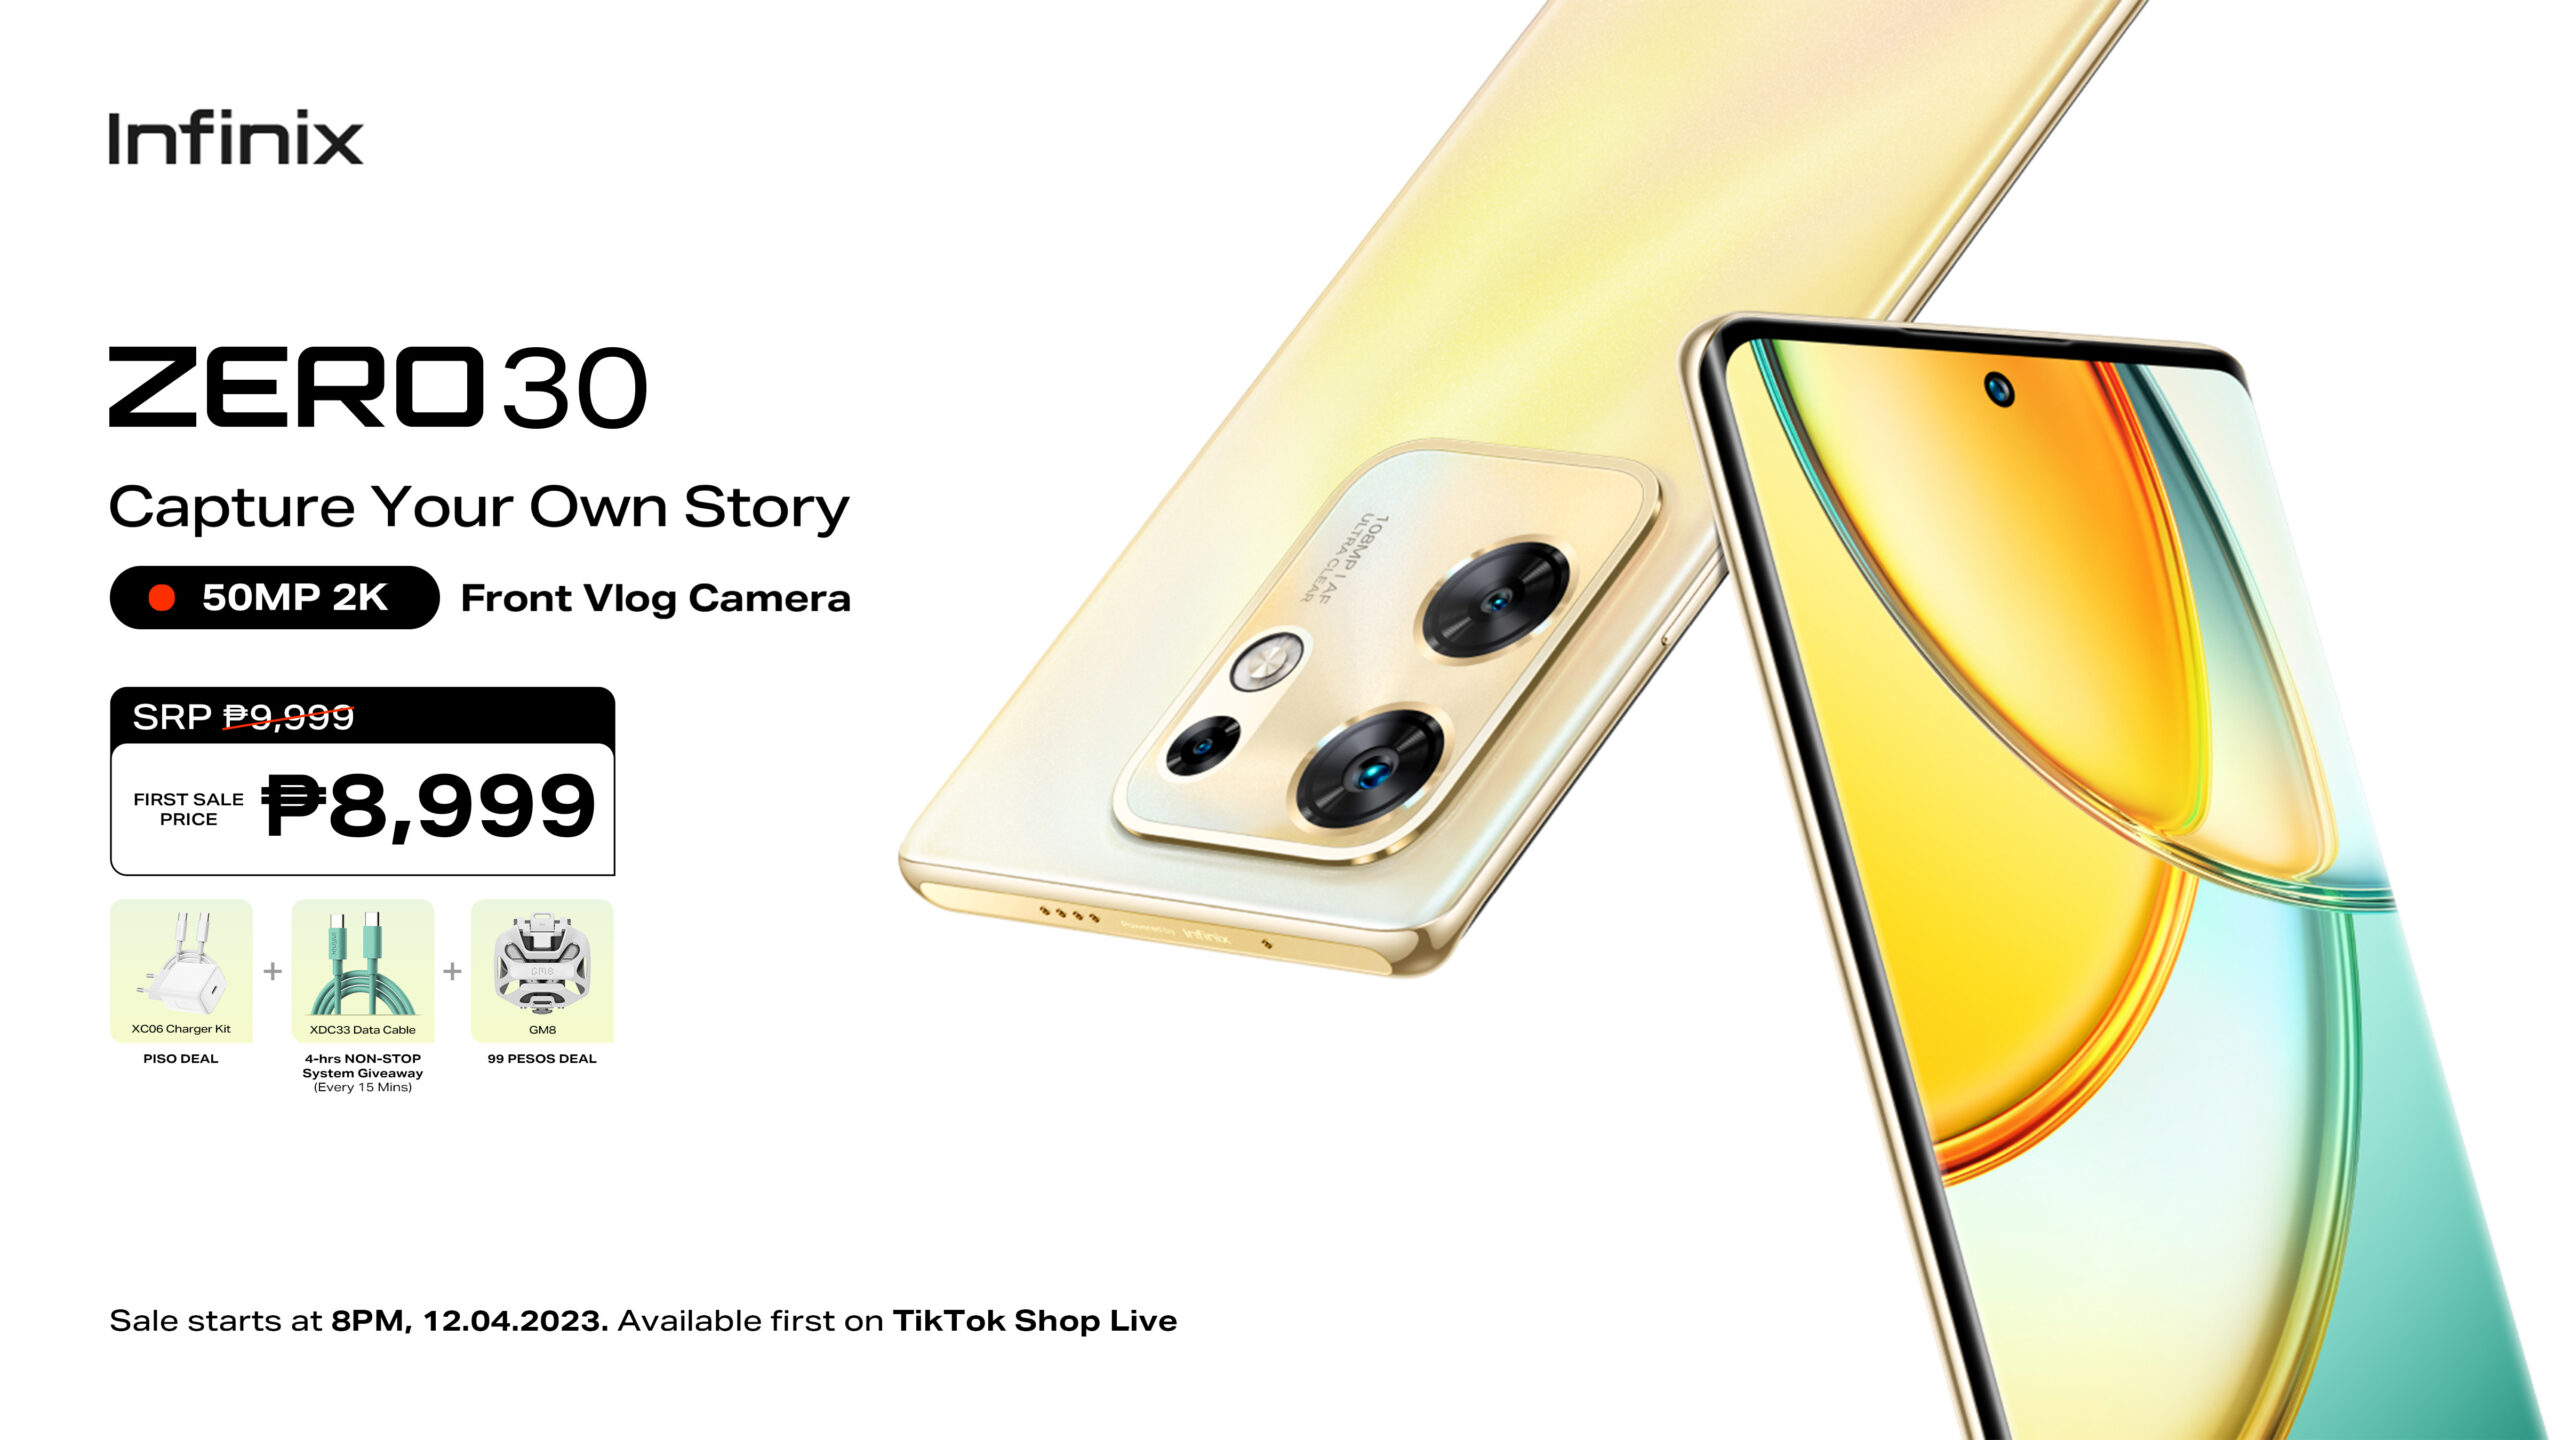 Infinix Launches ZERO 30, 50MP Front Vlog Camera Phone with 3D Curved AMOLED under 10K pesos